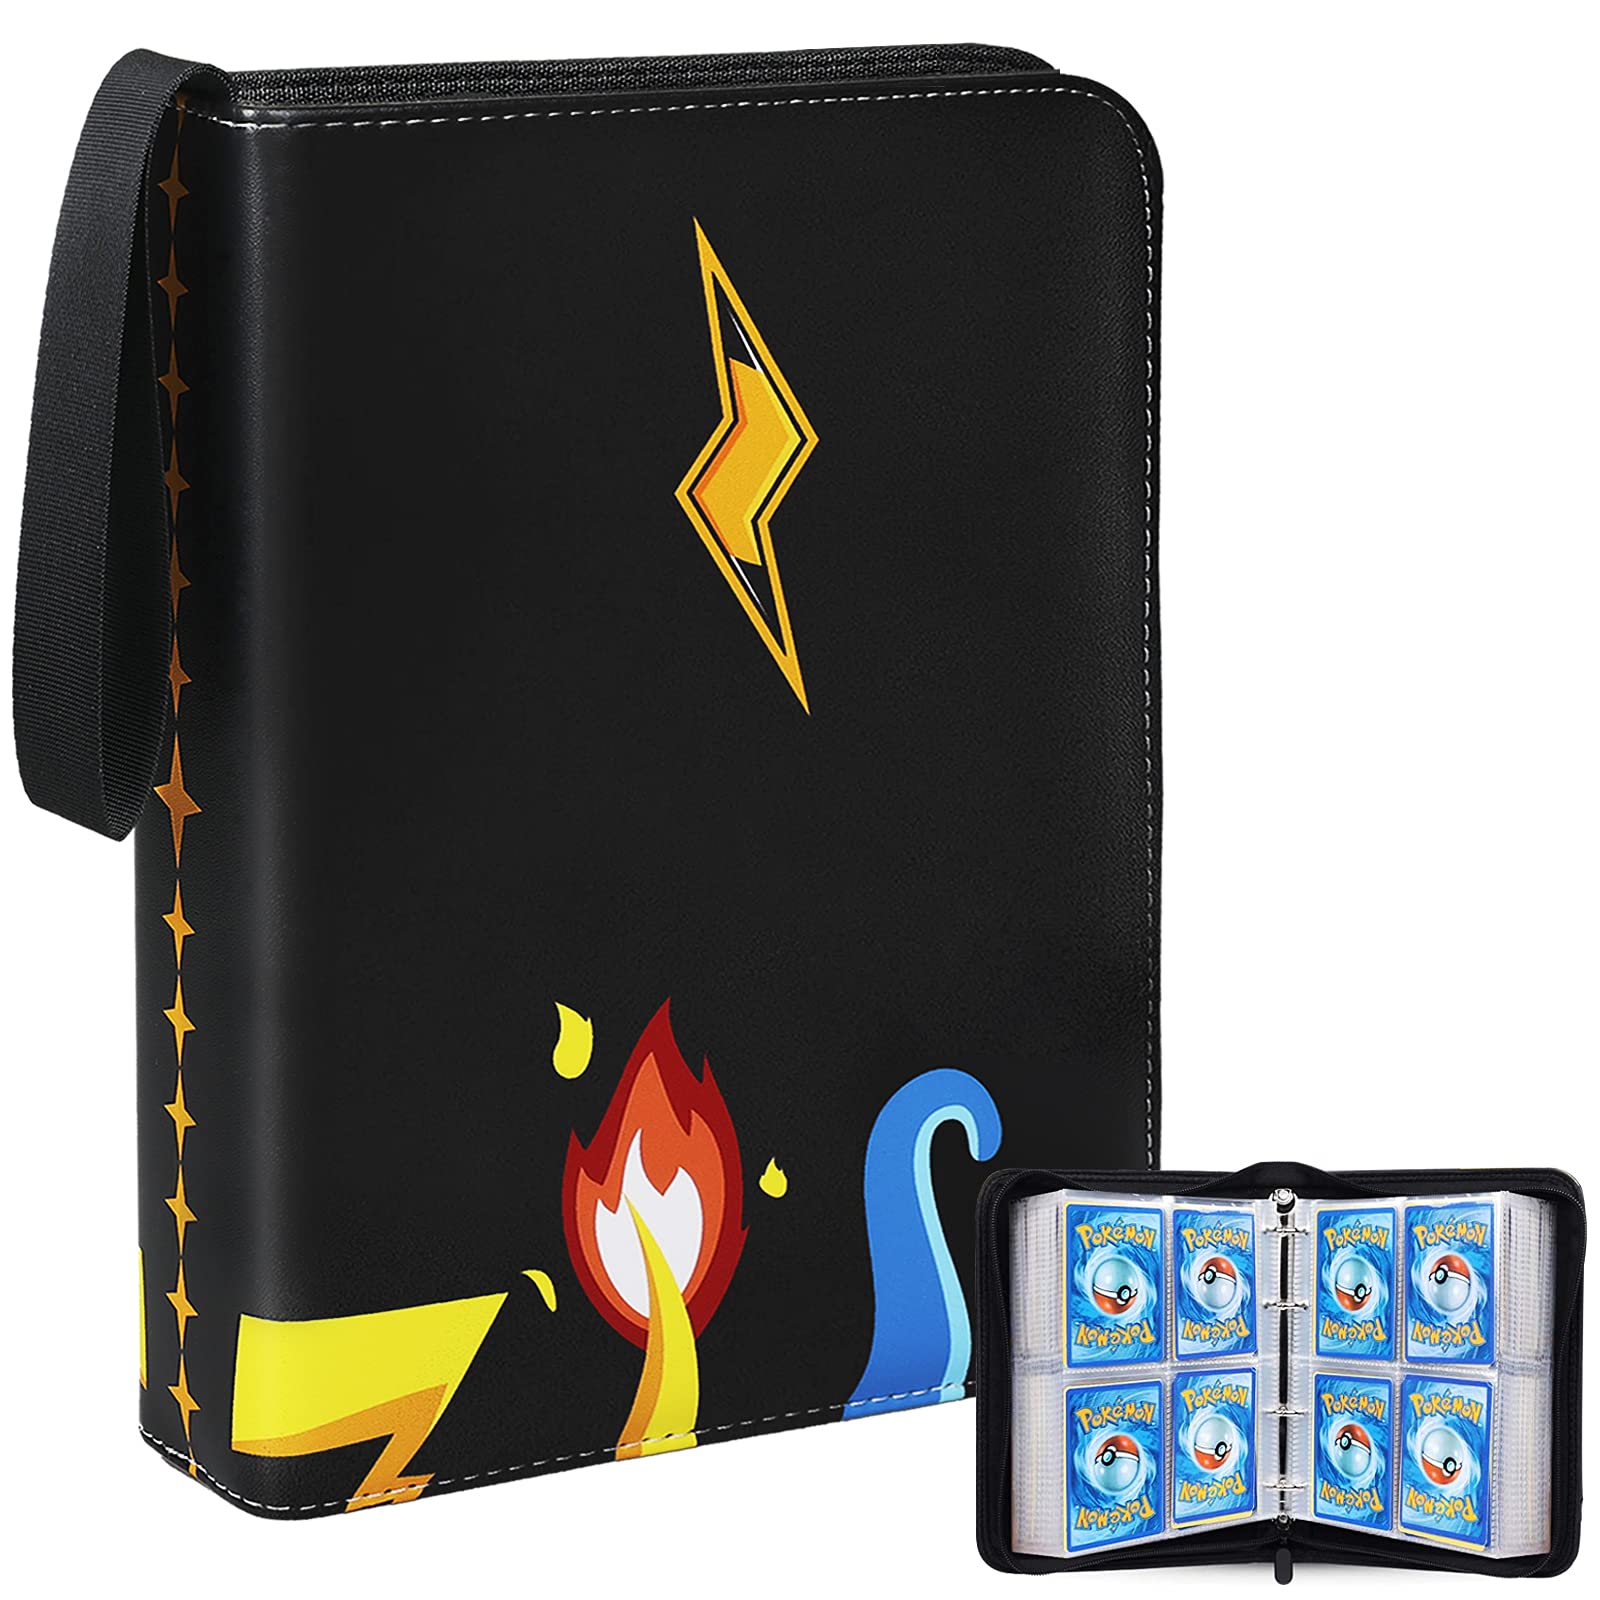 4-Pocket Binder for Pokemon Cards, Pokemon Card Binder with 50 Removable Sheets Holds 400 Cards, Trading Card Binder for Card Collector Album Holder Storage Book Folder-Toys Gifts for Boys Girls